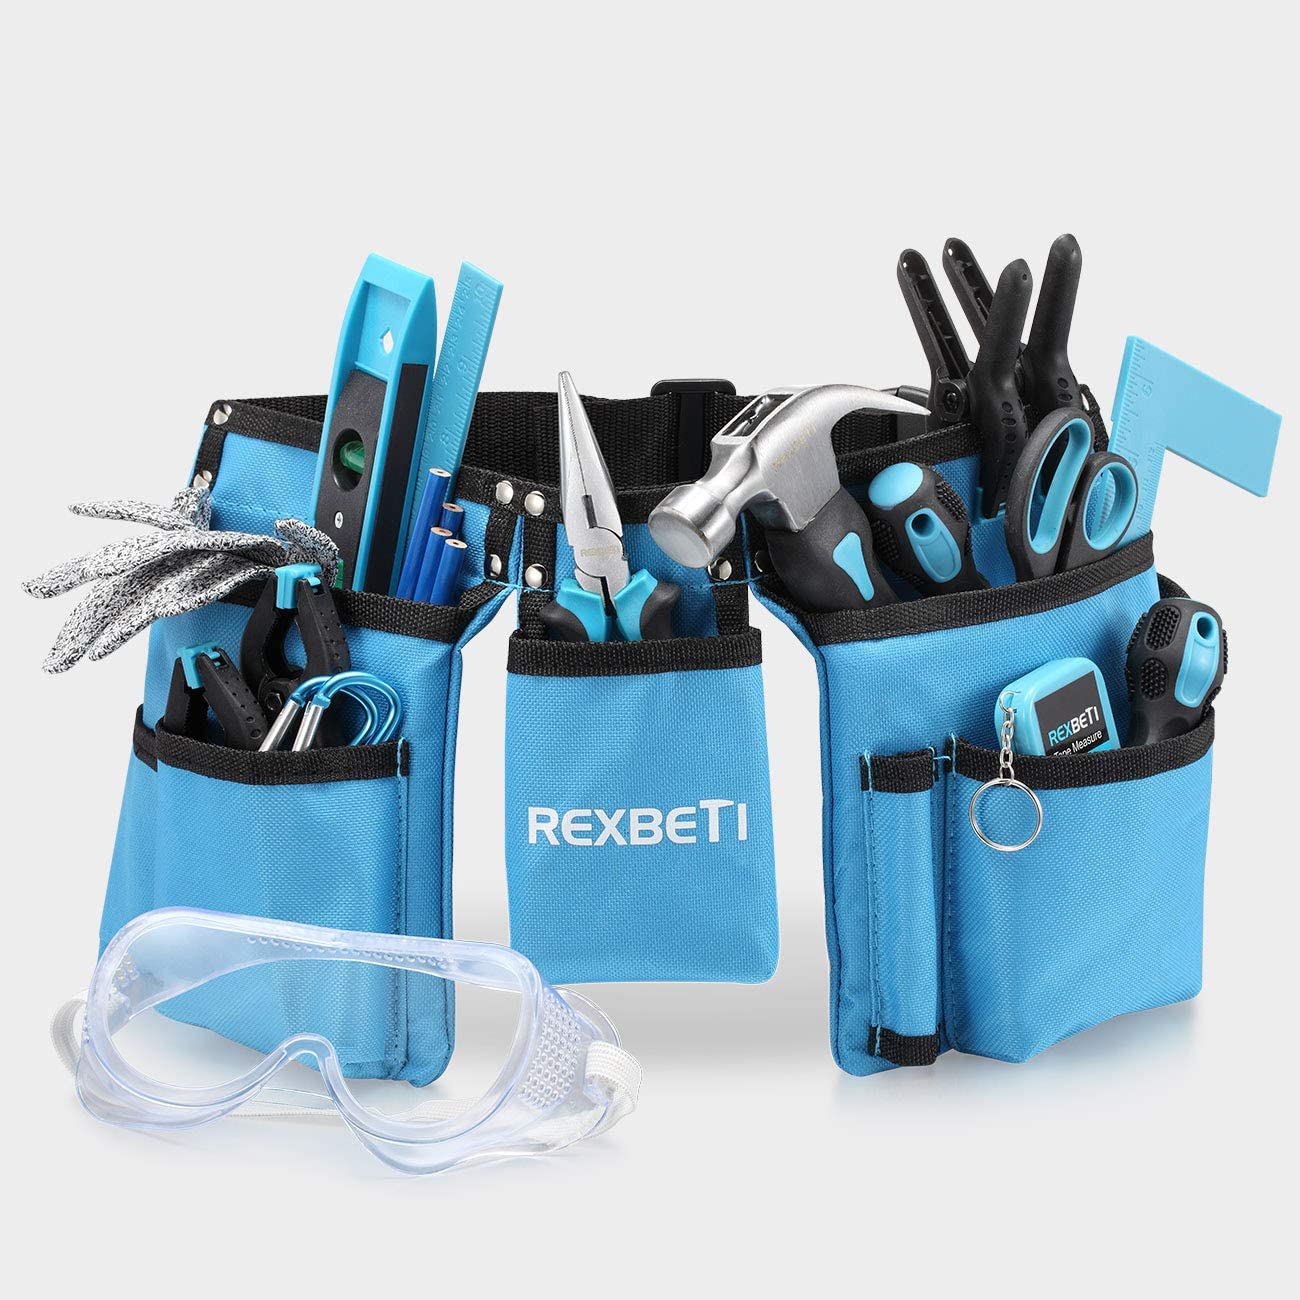 REXBETI 87pcs Young Builder's Tool Set with Real Hand Tools, Reinforced  Kids Tool Belt, Waist 20-32, Kids Learning Tool Kit for Home DIY and